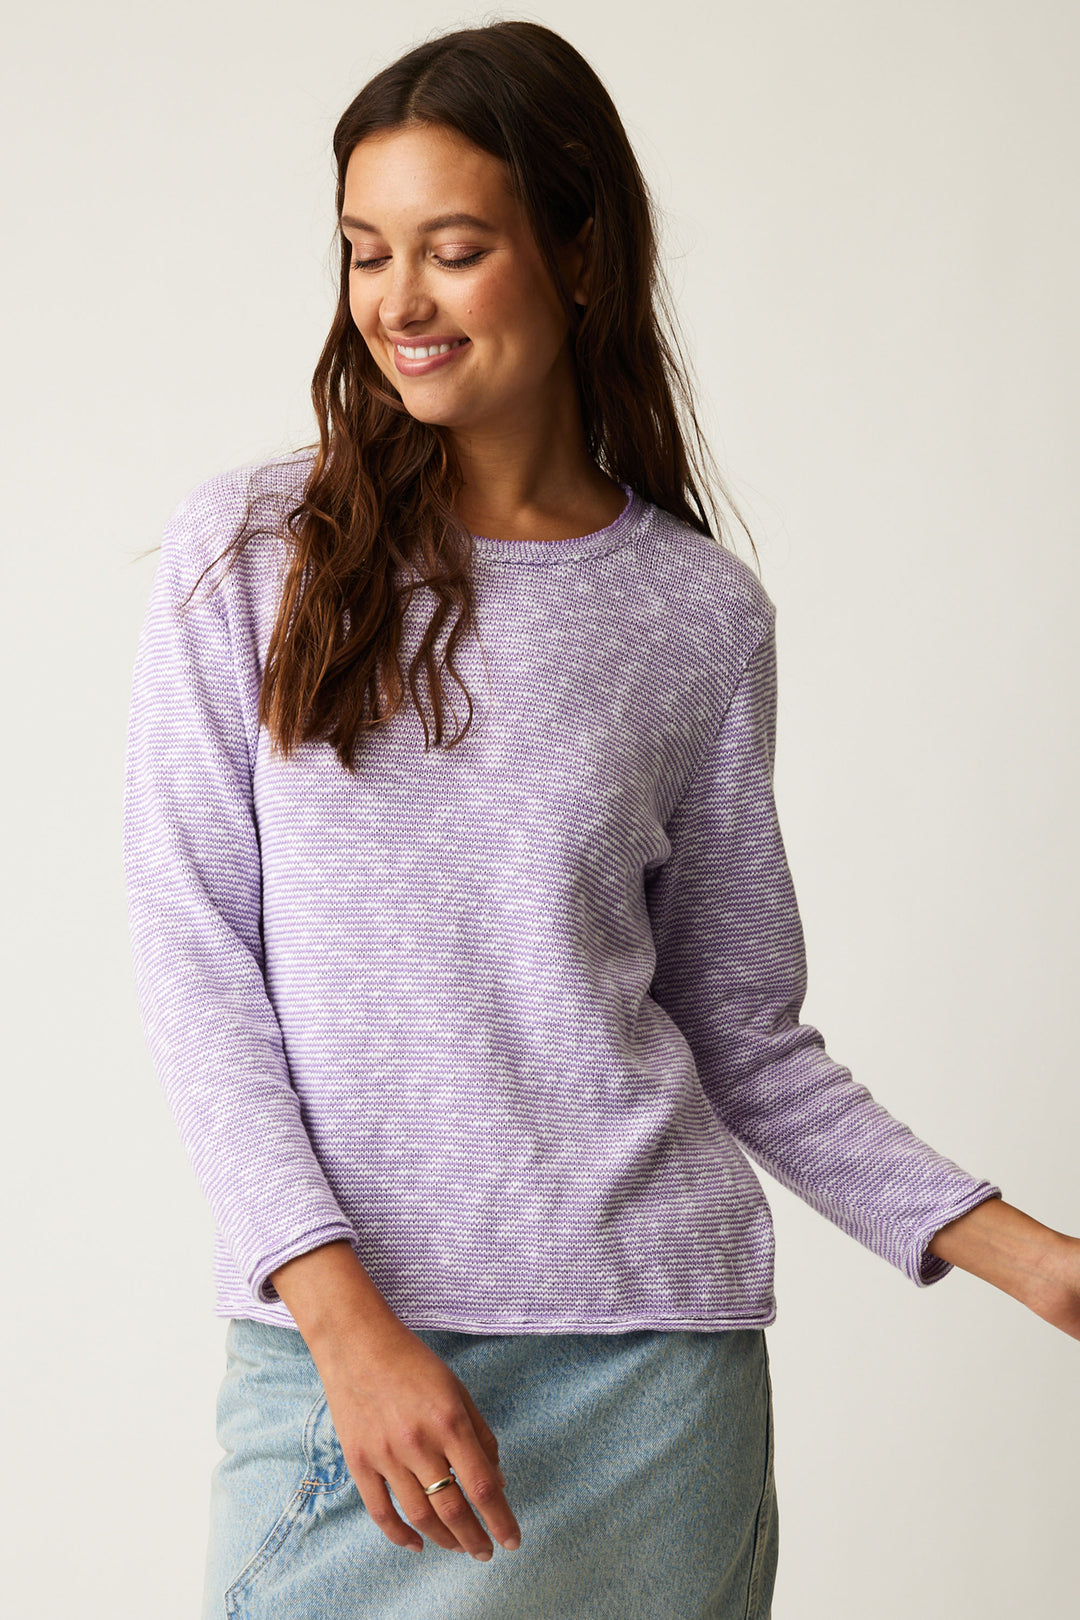 Cotton Country Spring 2024 Made with a light sweater material, it's soft and comfy for all-day wear.